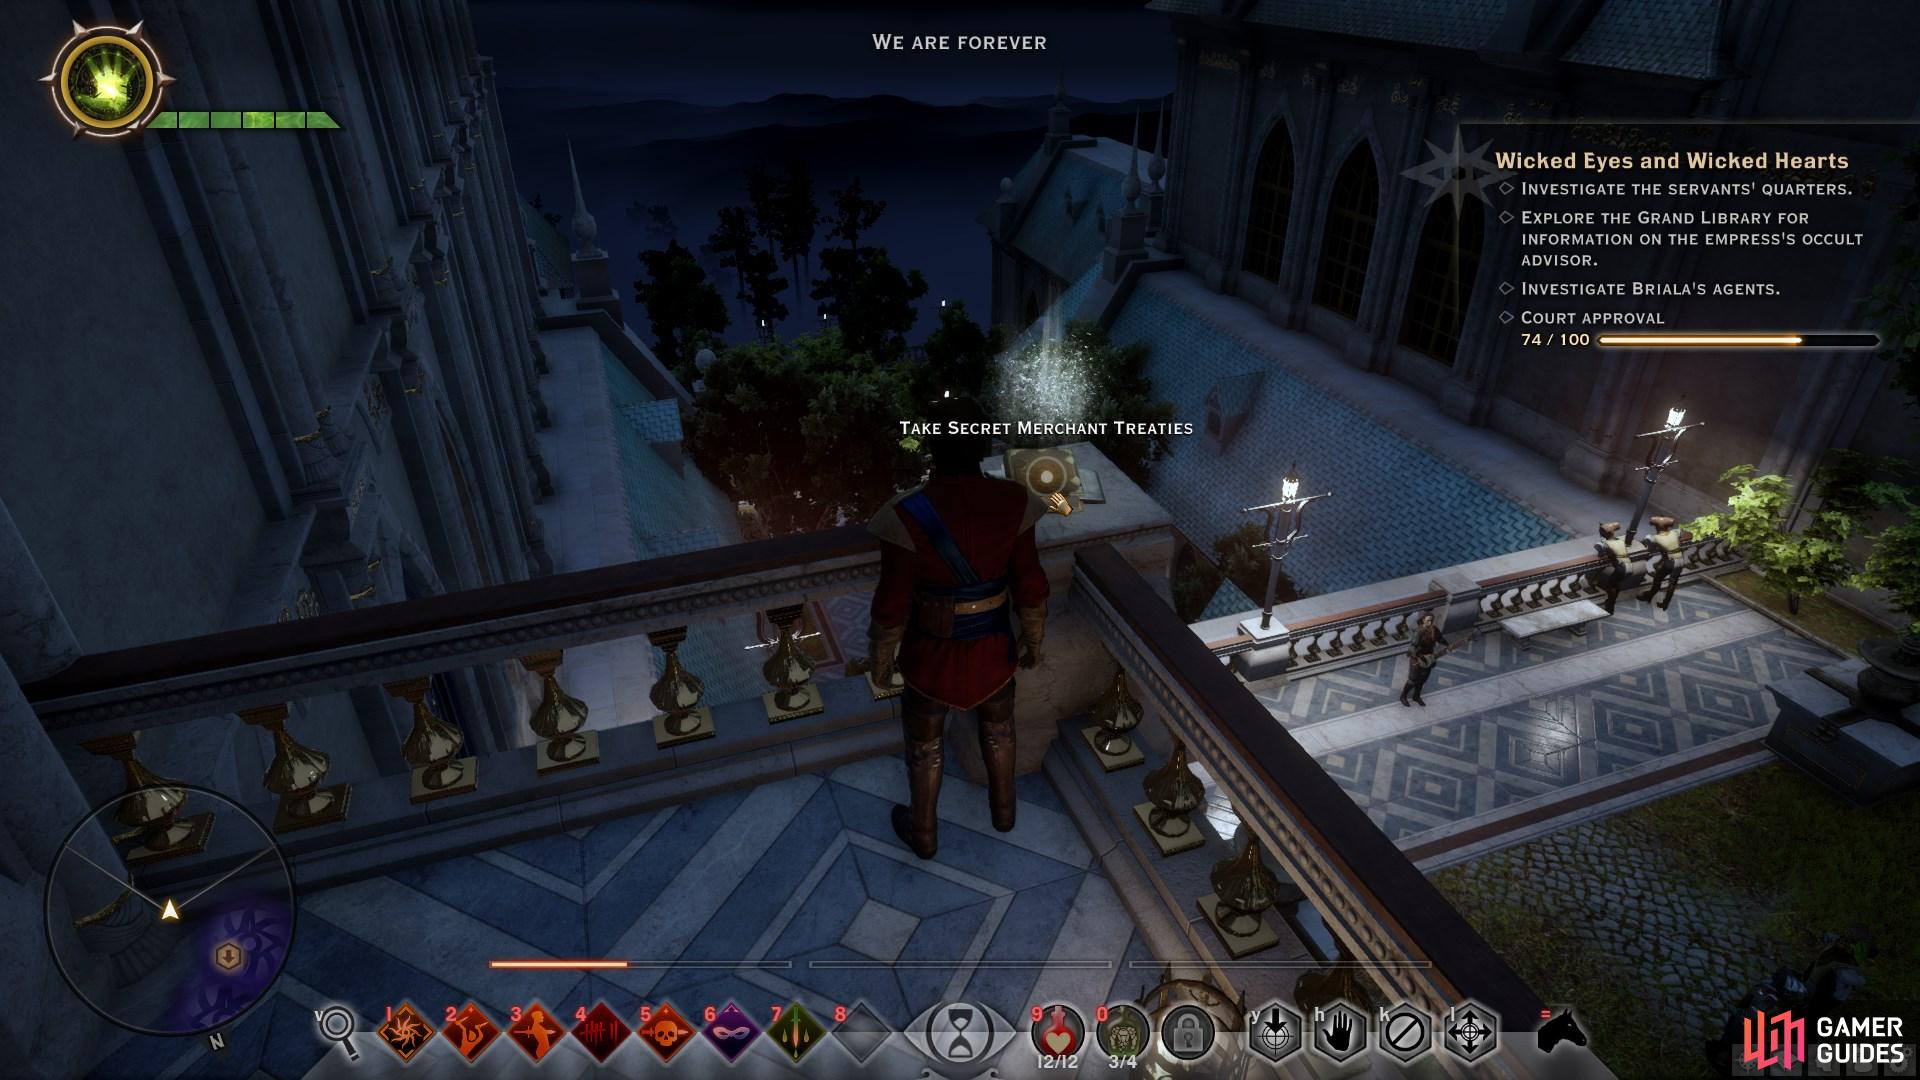 Search for Take Secret Merchant Treaties at the end of the balcony to the right as you ascend to the library.